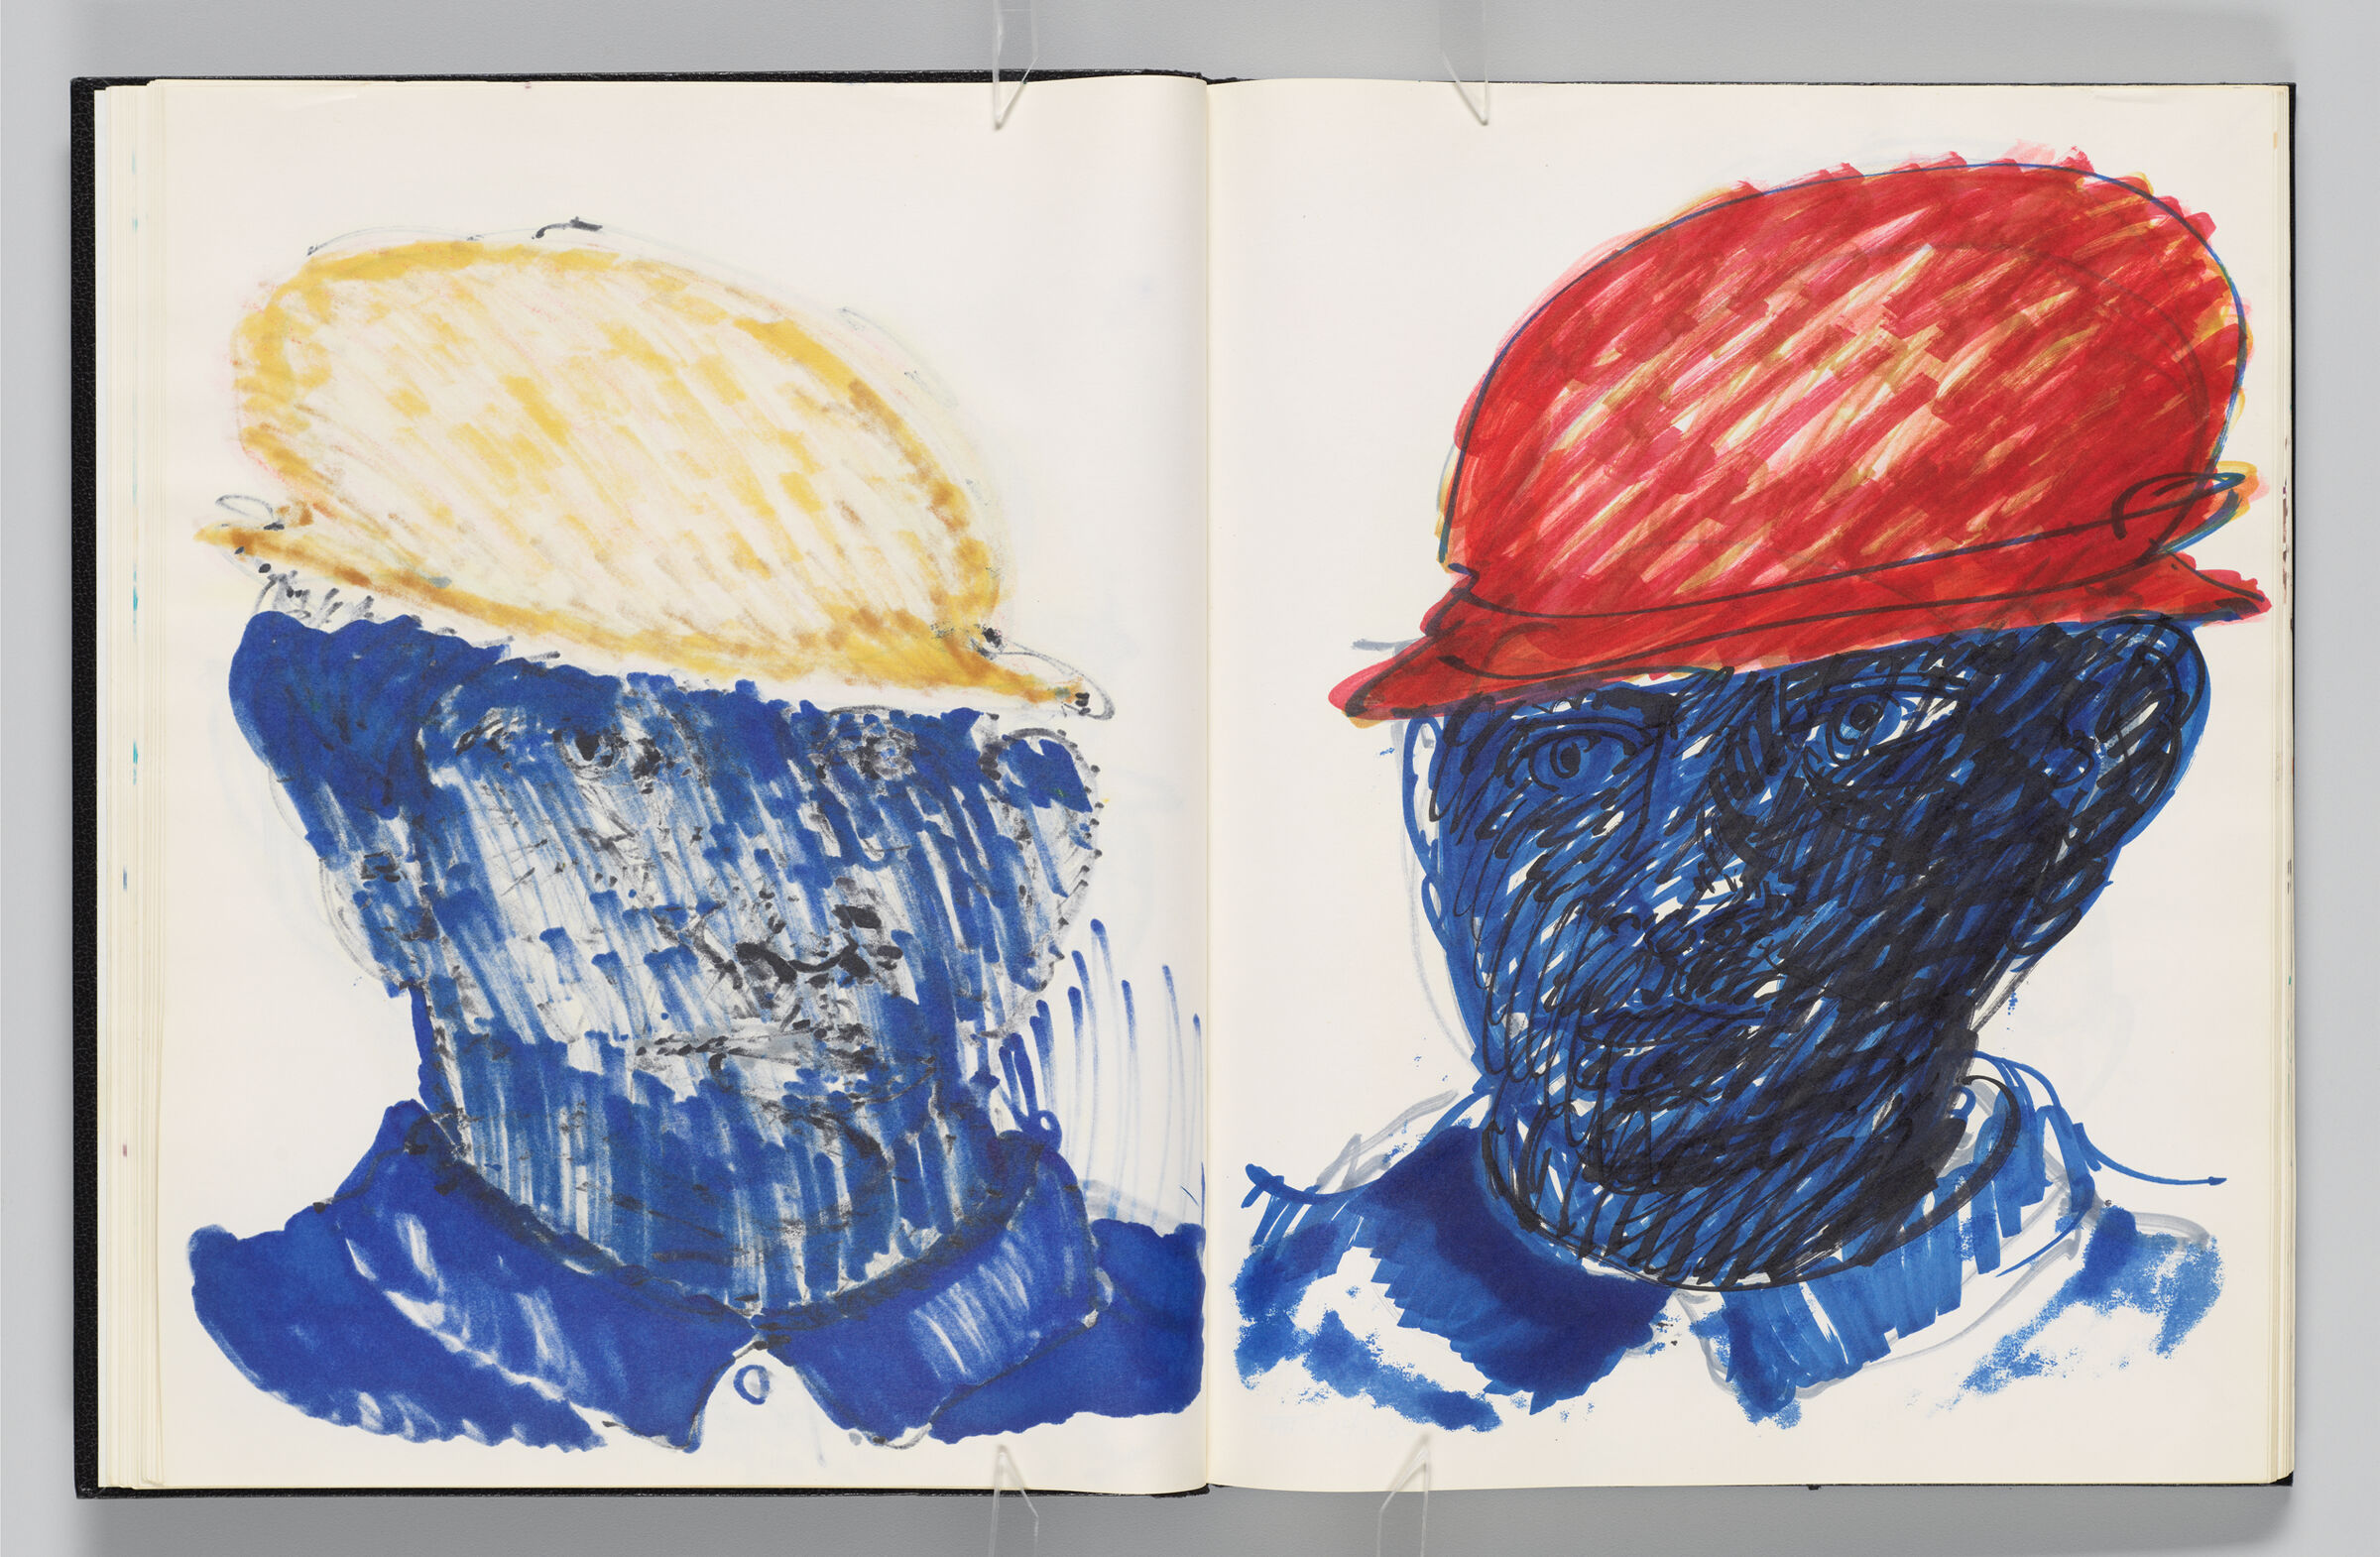 Untitled (Bleed-Through Of Previous Page, Left Page); Untitled (Portrait Of Male Figure With Color Transfer, Right Page)